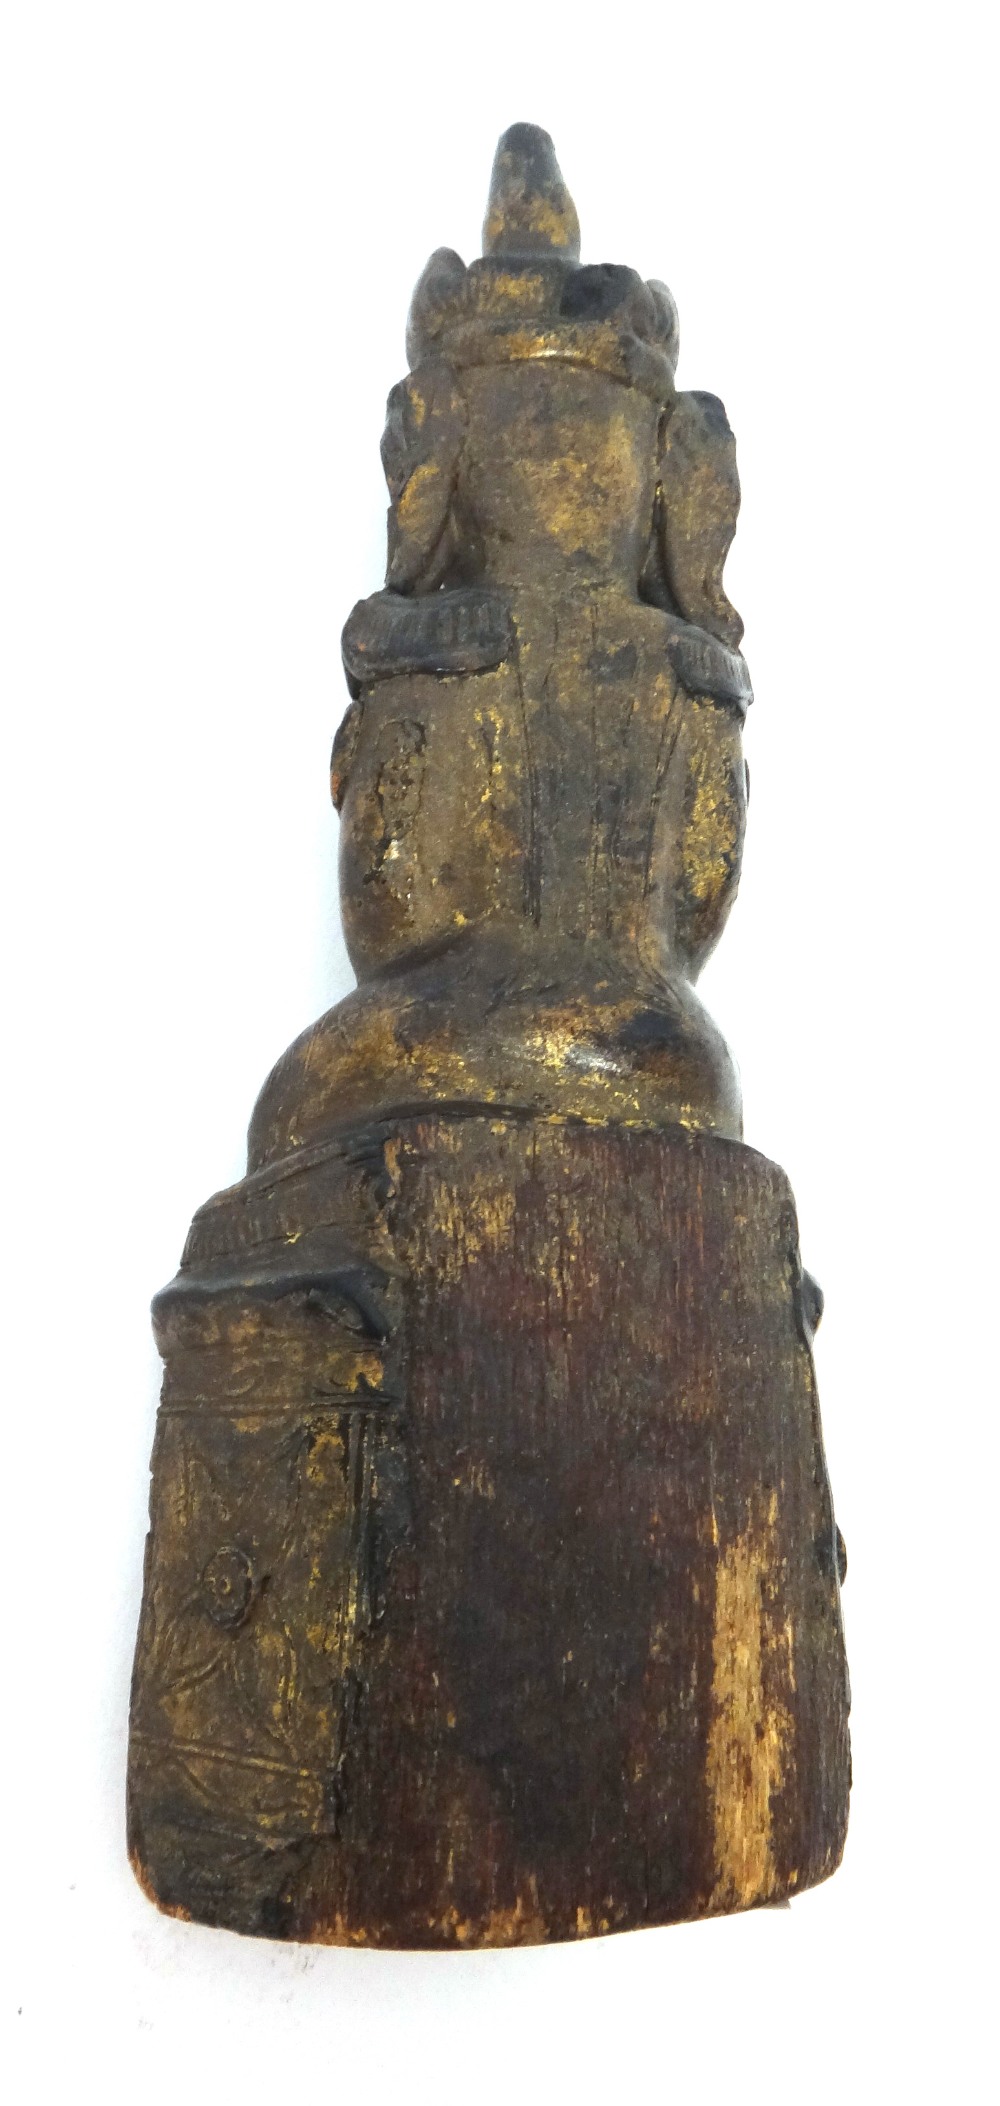 A group of three small Thai bronze buddha heads, probably circa 14th century, tallest 11cm. - Image 10 of 10